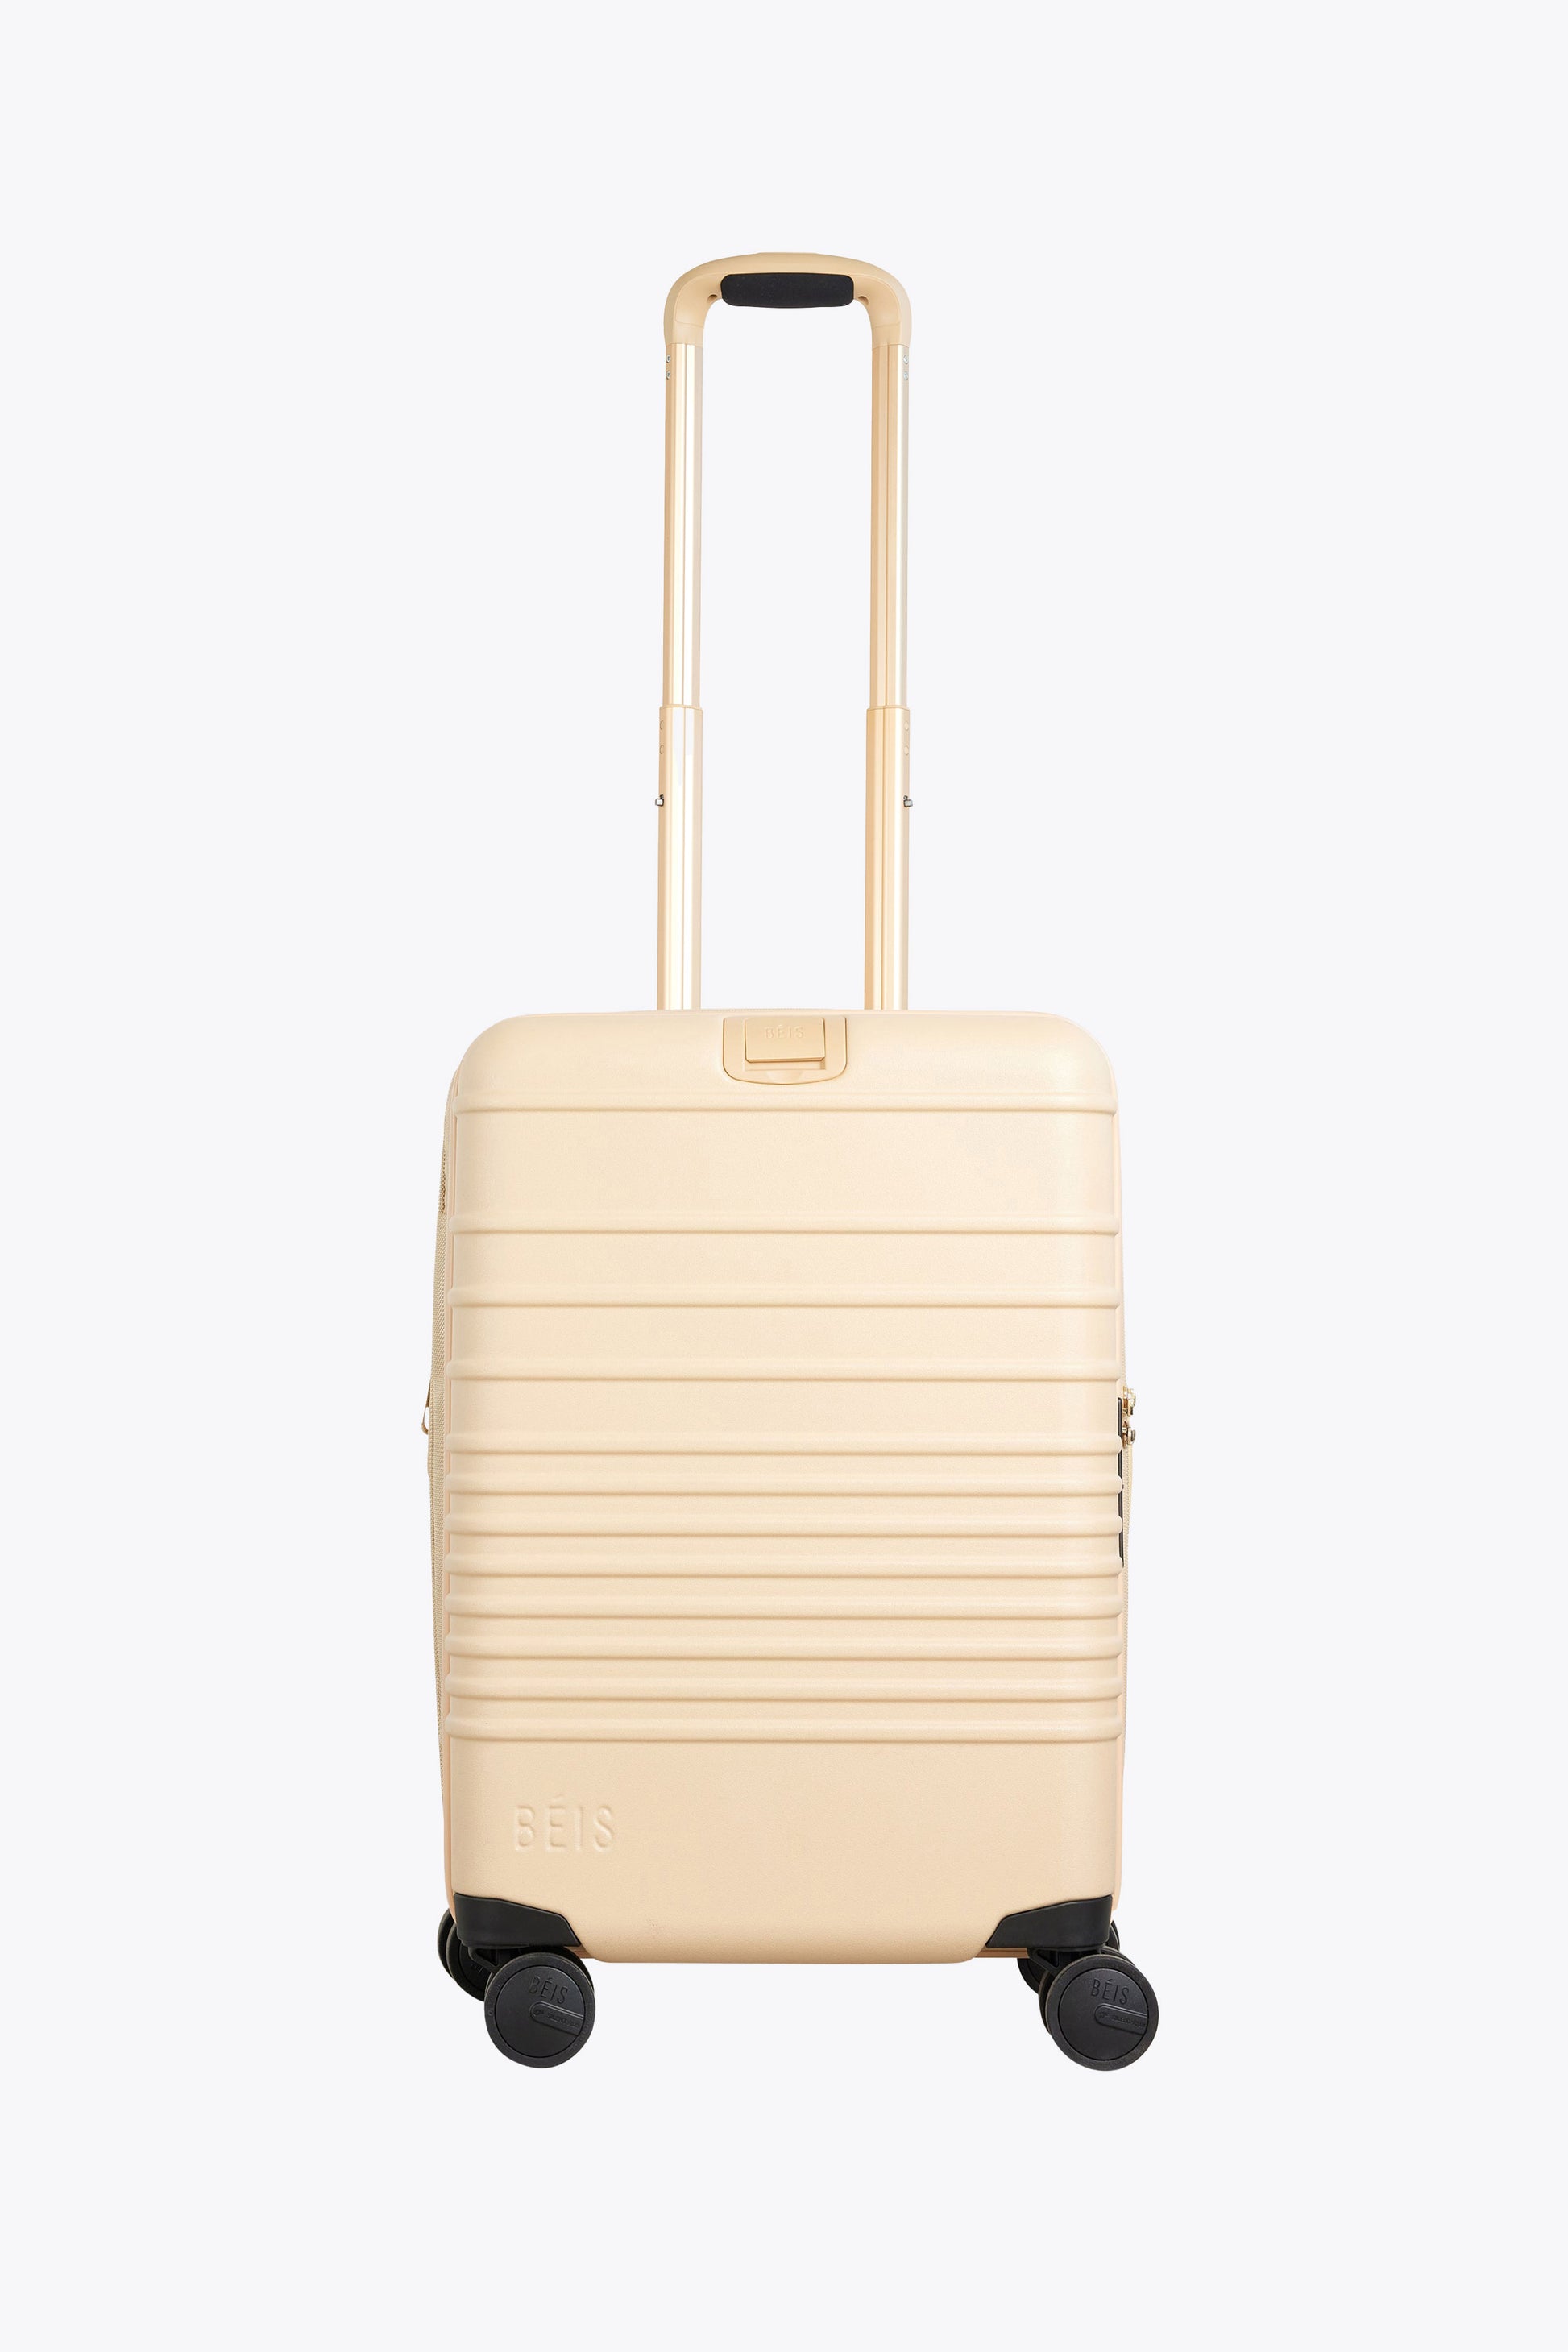 BÉIS 'The Carry-On Roller' in Beige - 21 Carry On Beige Suitcases u0026 Hand  Luggage | BÉIS Travel CA